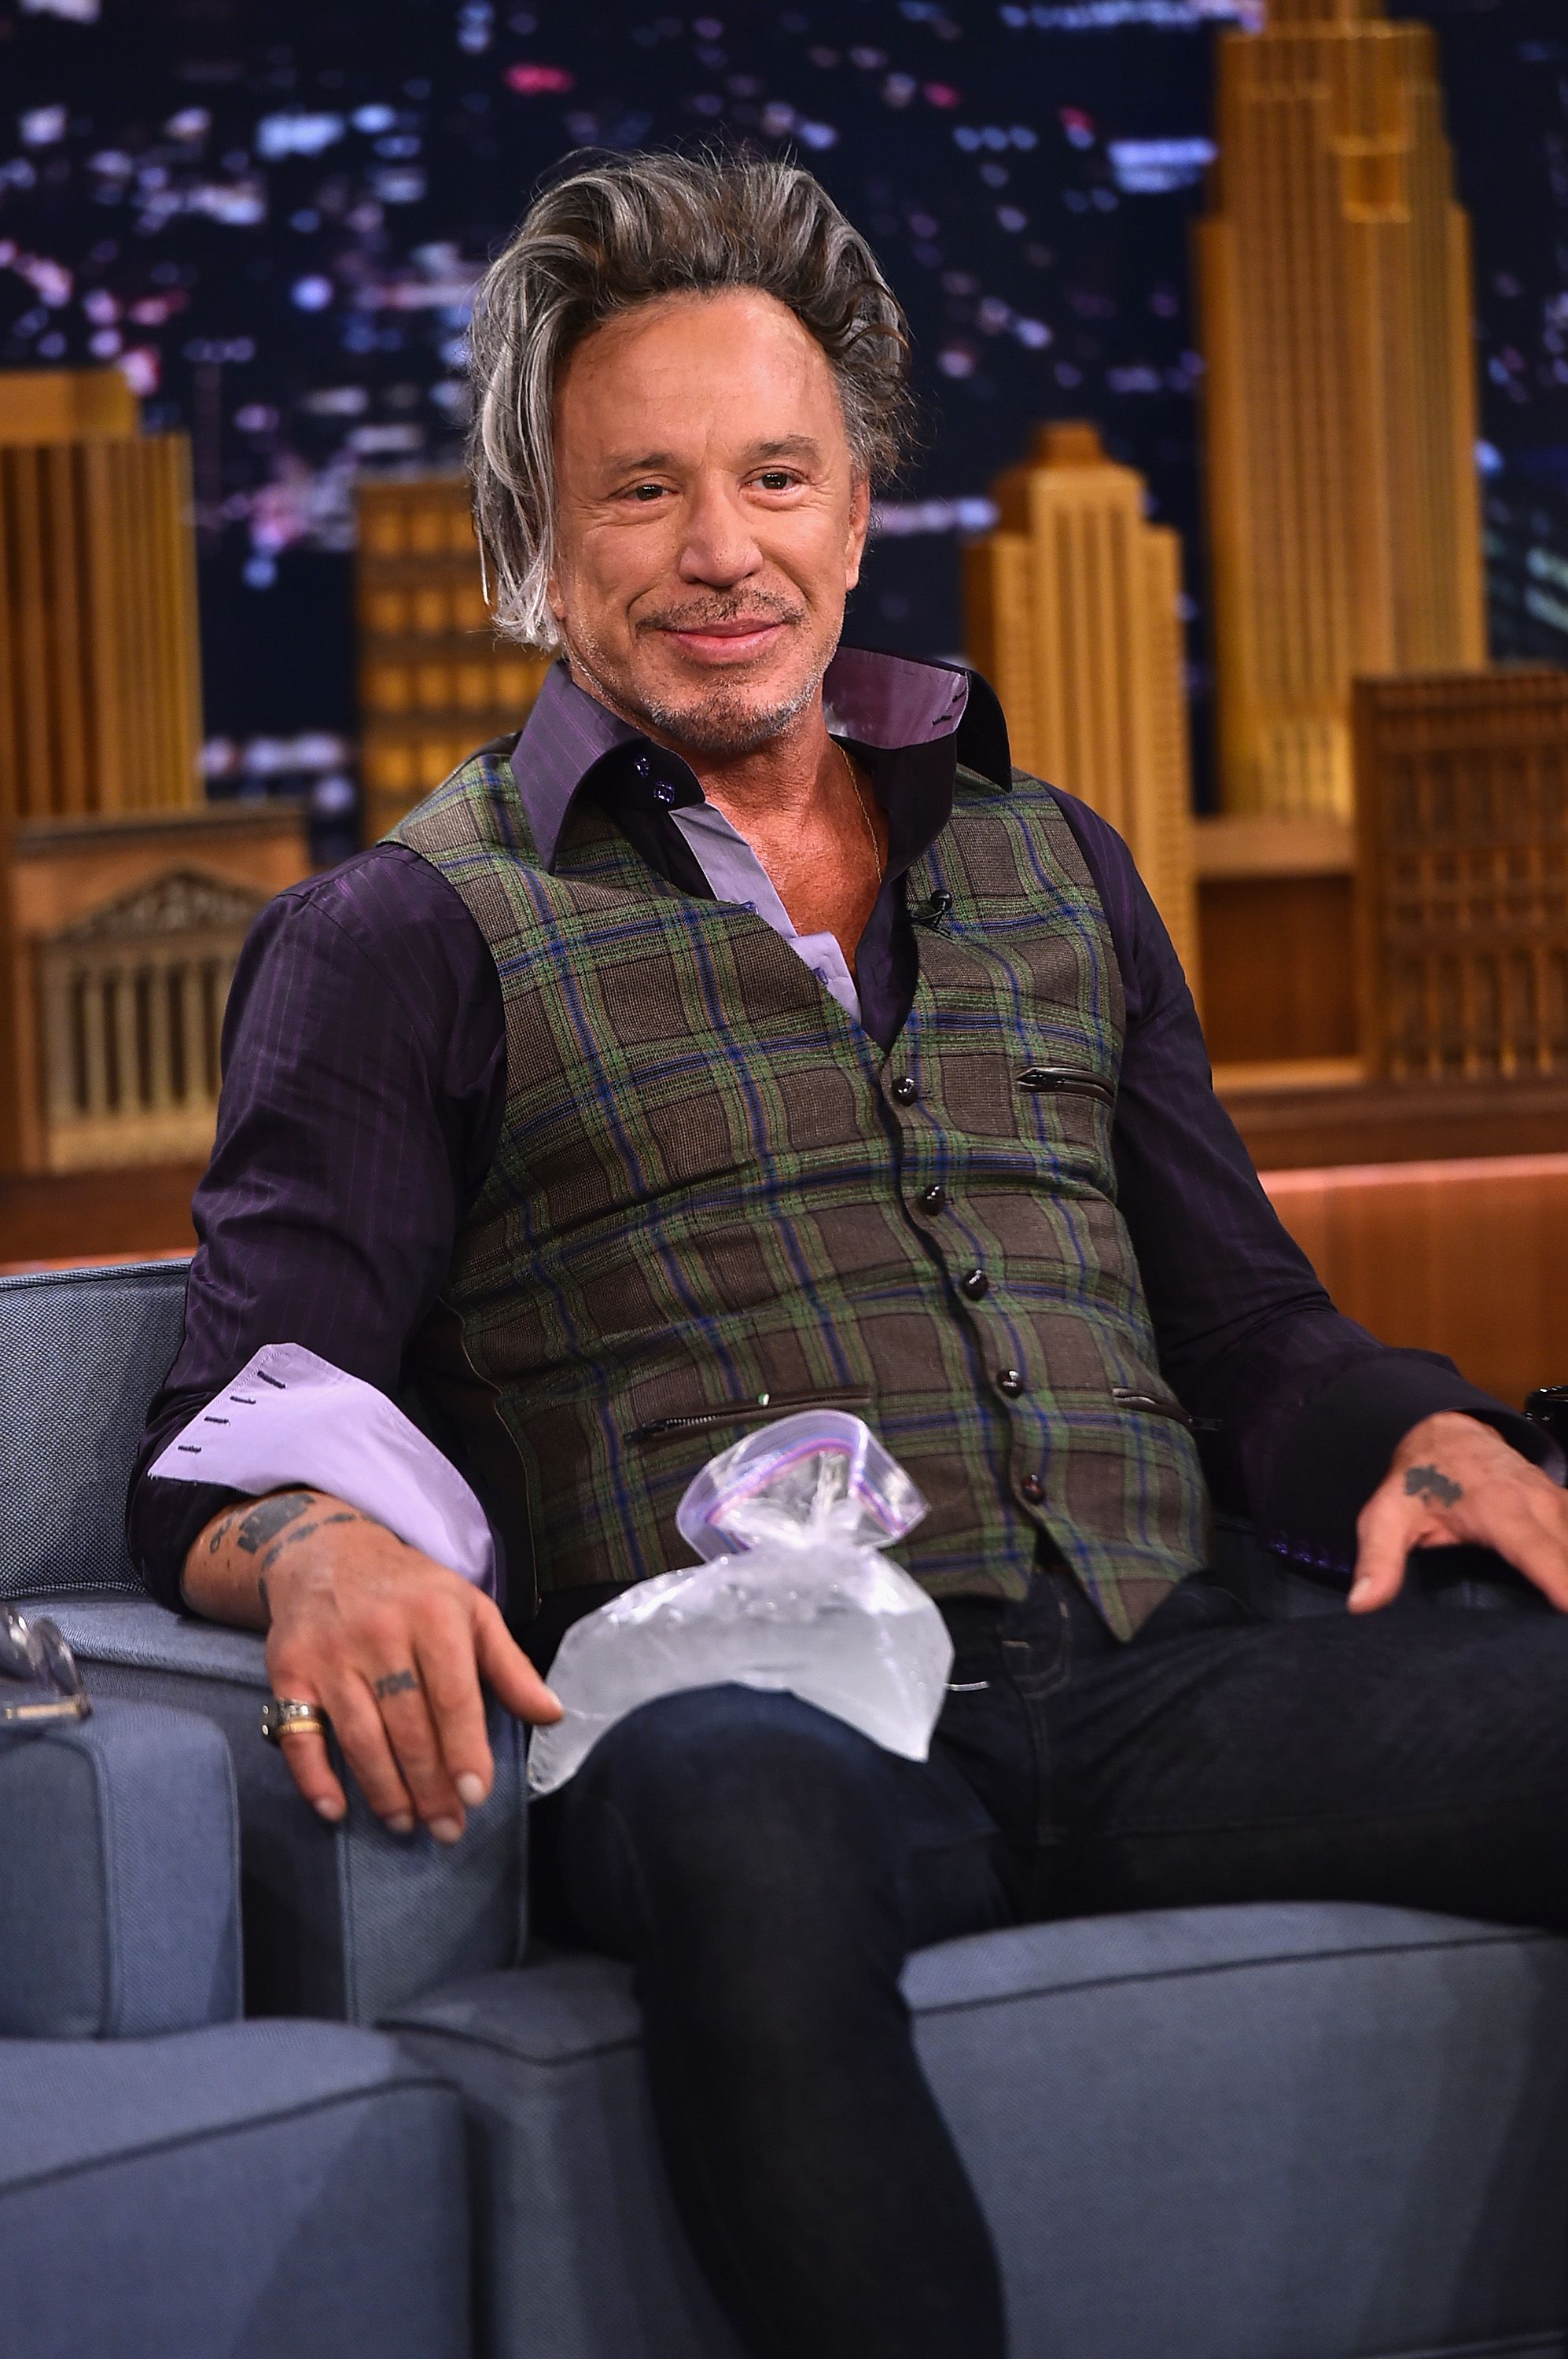 Mickey Rourke at "The Tonight Show starring Jimmy Fallon" at Rockefeller Center on August 12, 2014 | Photo: Getty Images